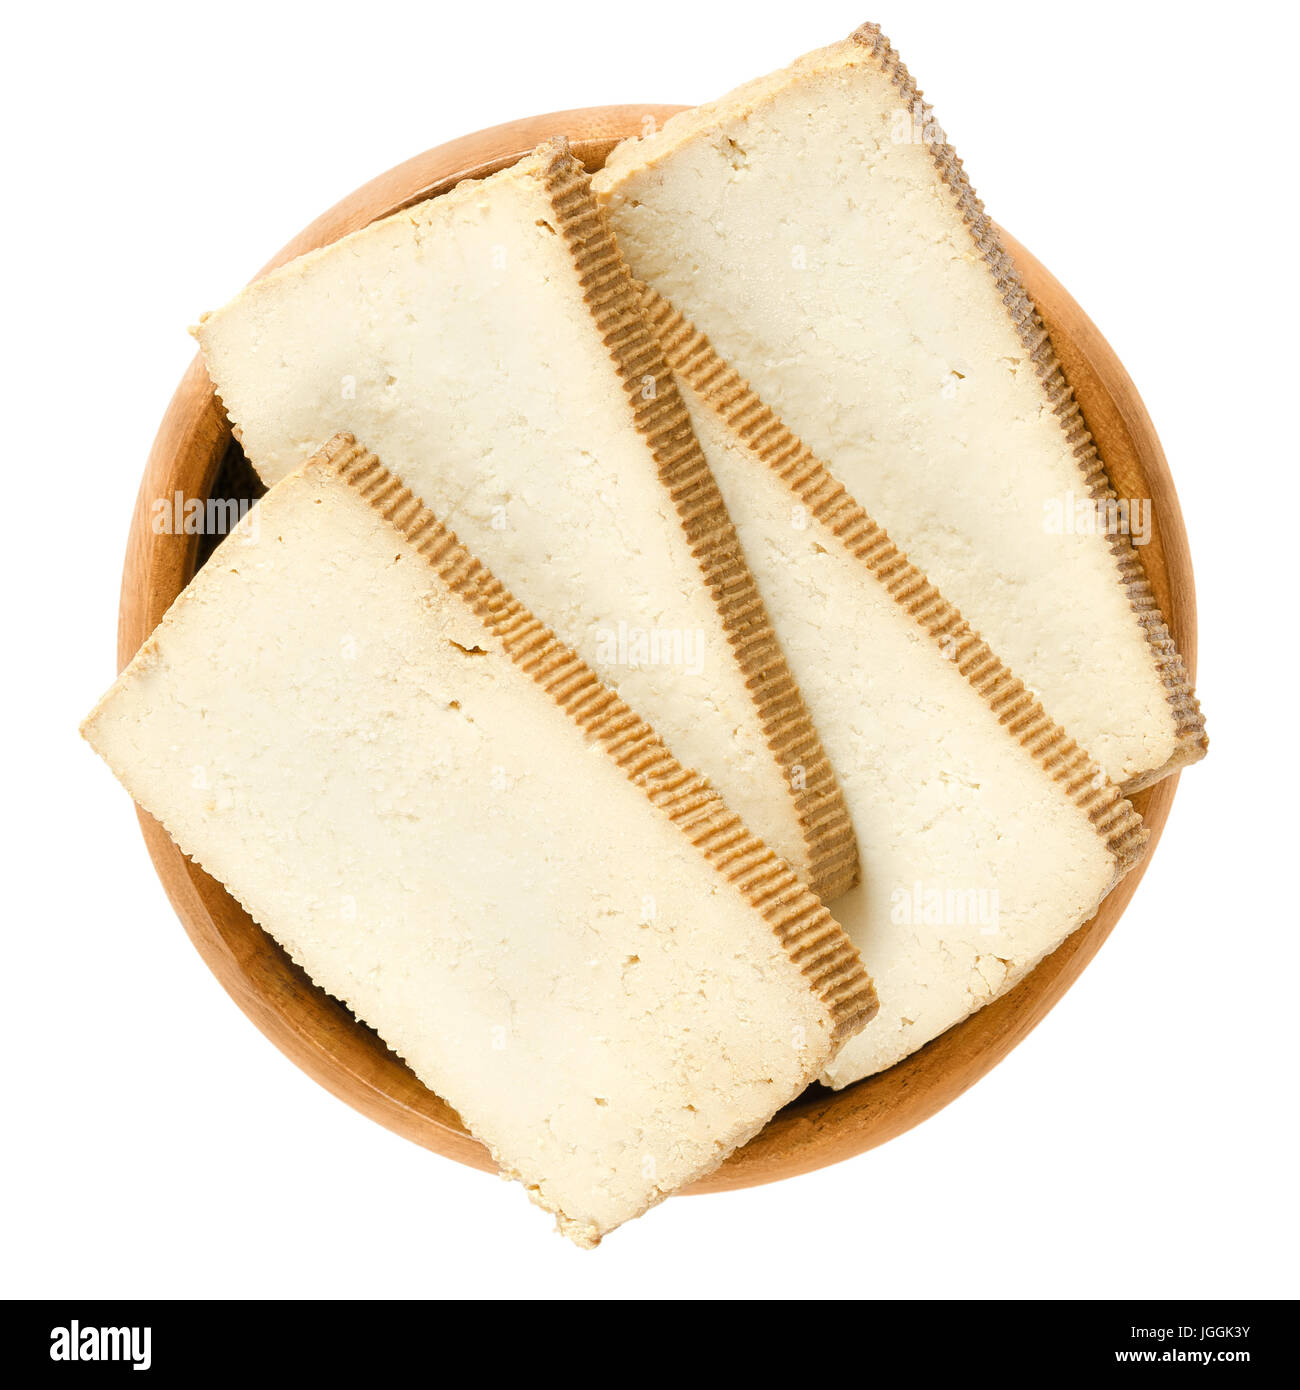 Smoked tofu slices in wooden bowl. Bean curd. Coagulated soy milk, pressed into firm white blocks. Component of Asian cuisine. Meat substitute. Stock Photo